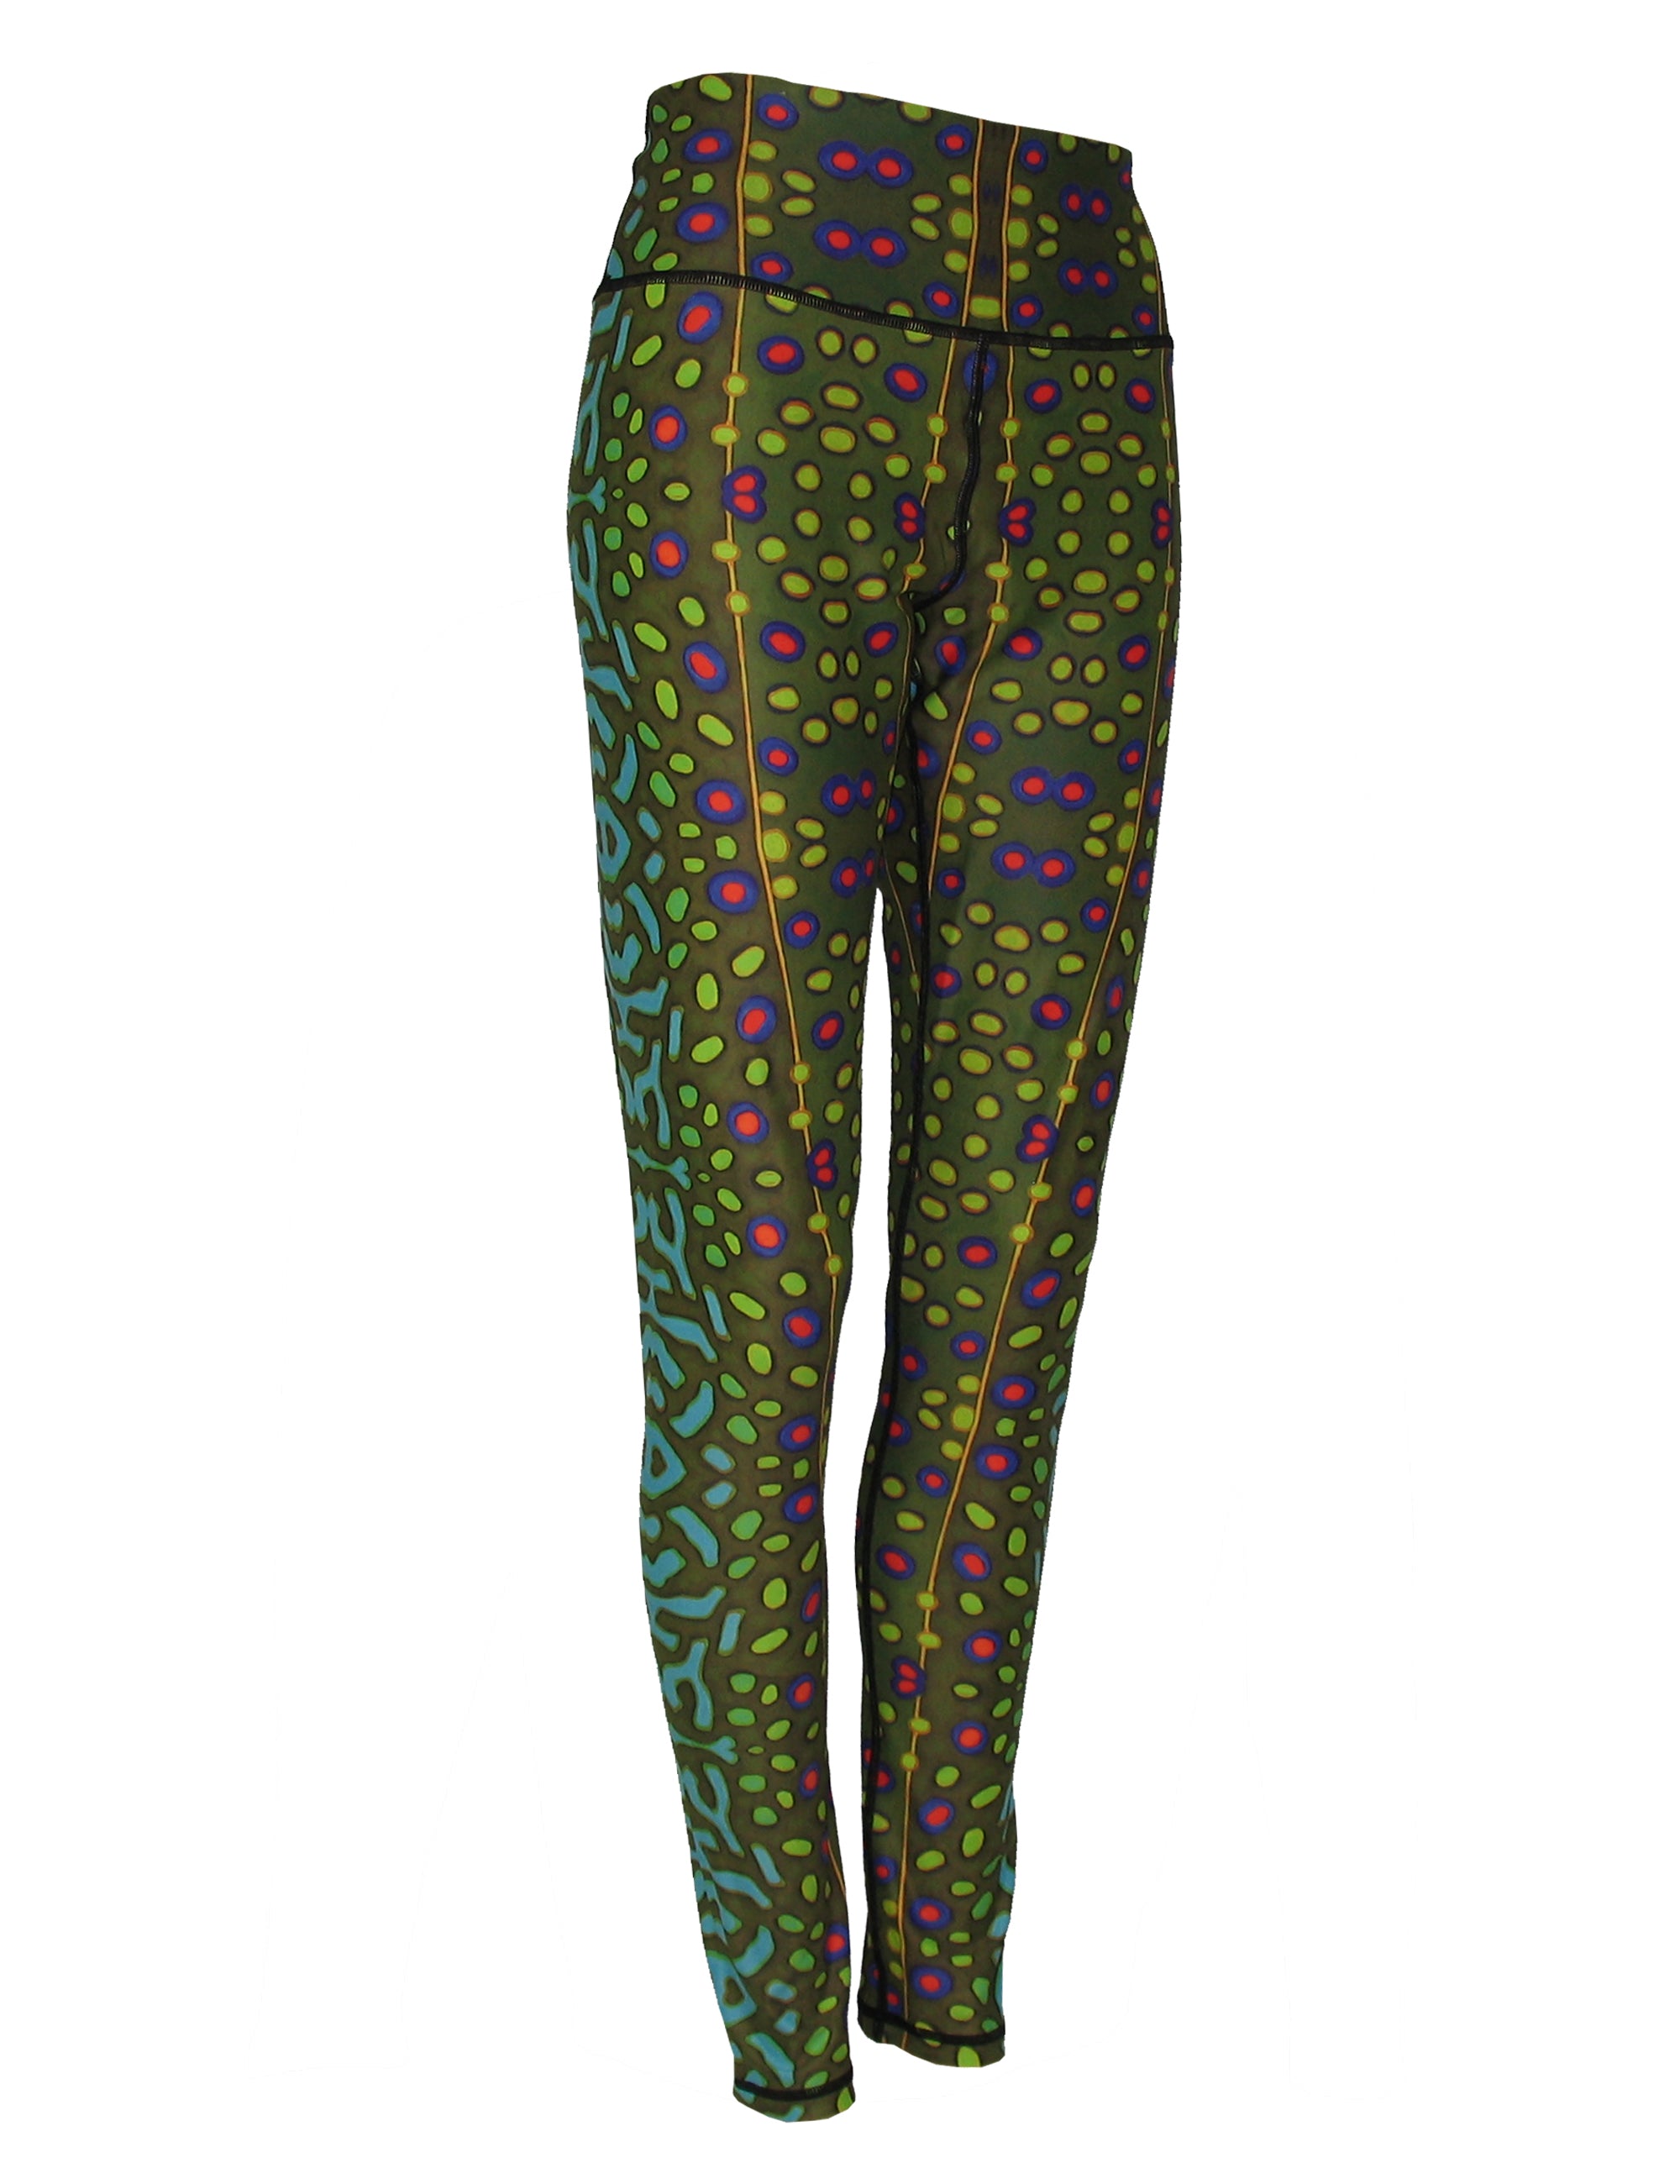 Brook Trout Fish Print Patterned Leggings Women's Fly Fishing Clothing -  Cognito Brands, Inc.